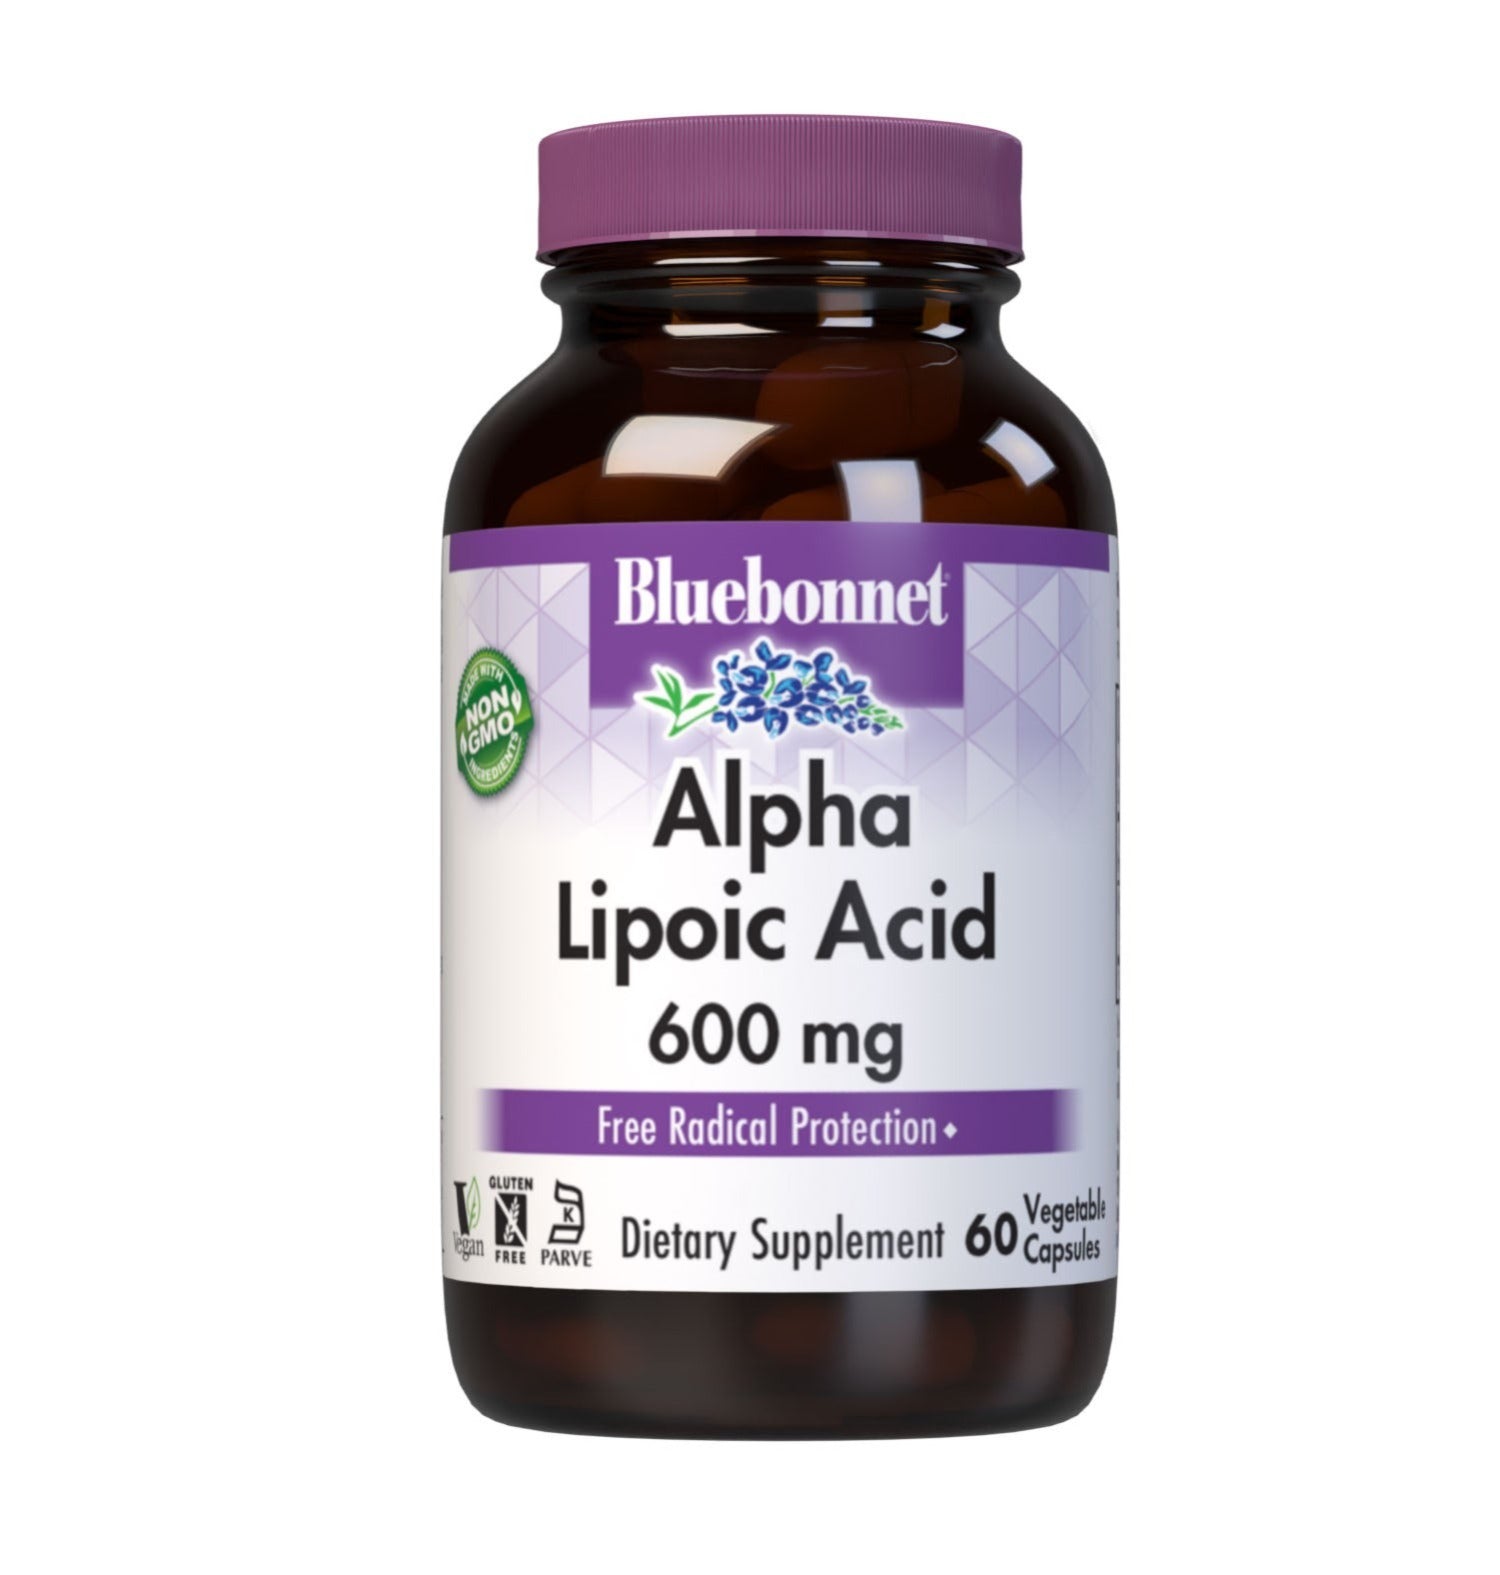 Bluebonnet’s Alpha Lipoic Acid 600 mg 60 Vegetable Capsules are formulated with alpha lipoic acid in its crystalline form. Alpha lipoic acid is a unique antioxidant that is both fat-soluble and water-soluble, and is known for its free radical scavenger activity.  #size_60 count